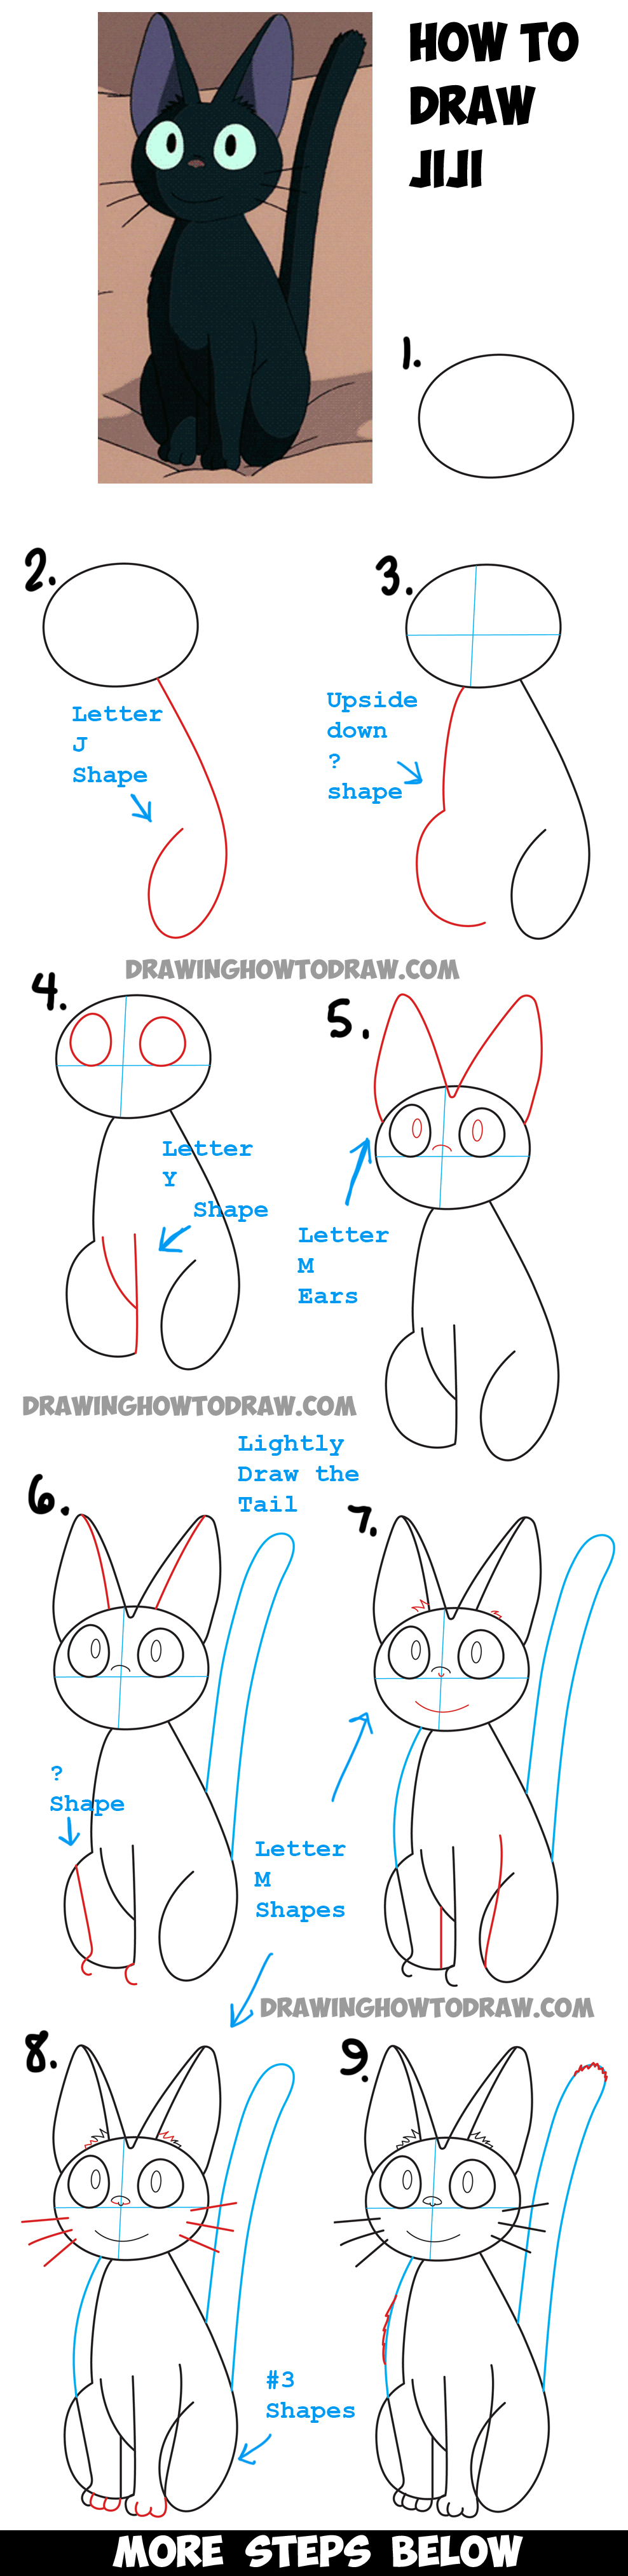 Learn How to Draw Jiji from Kiki's Delivery Service - Simple Steps Drawing Lesson